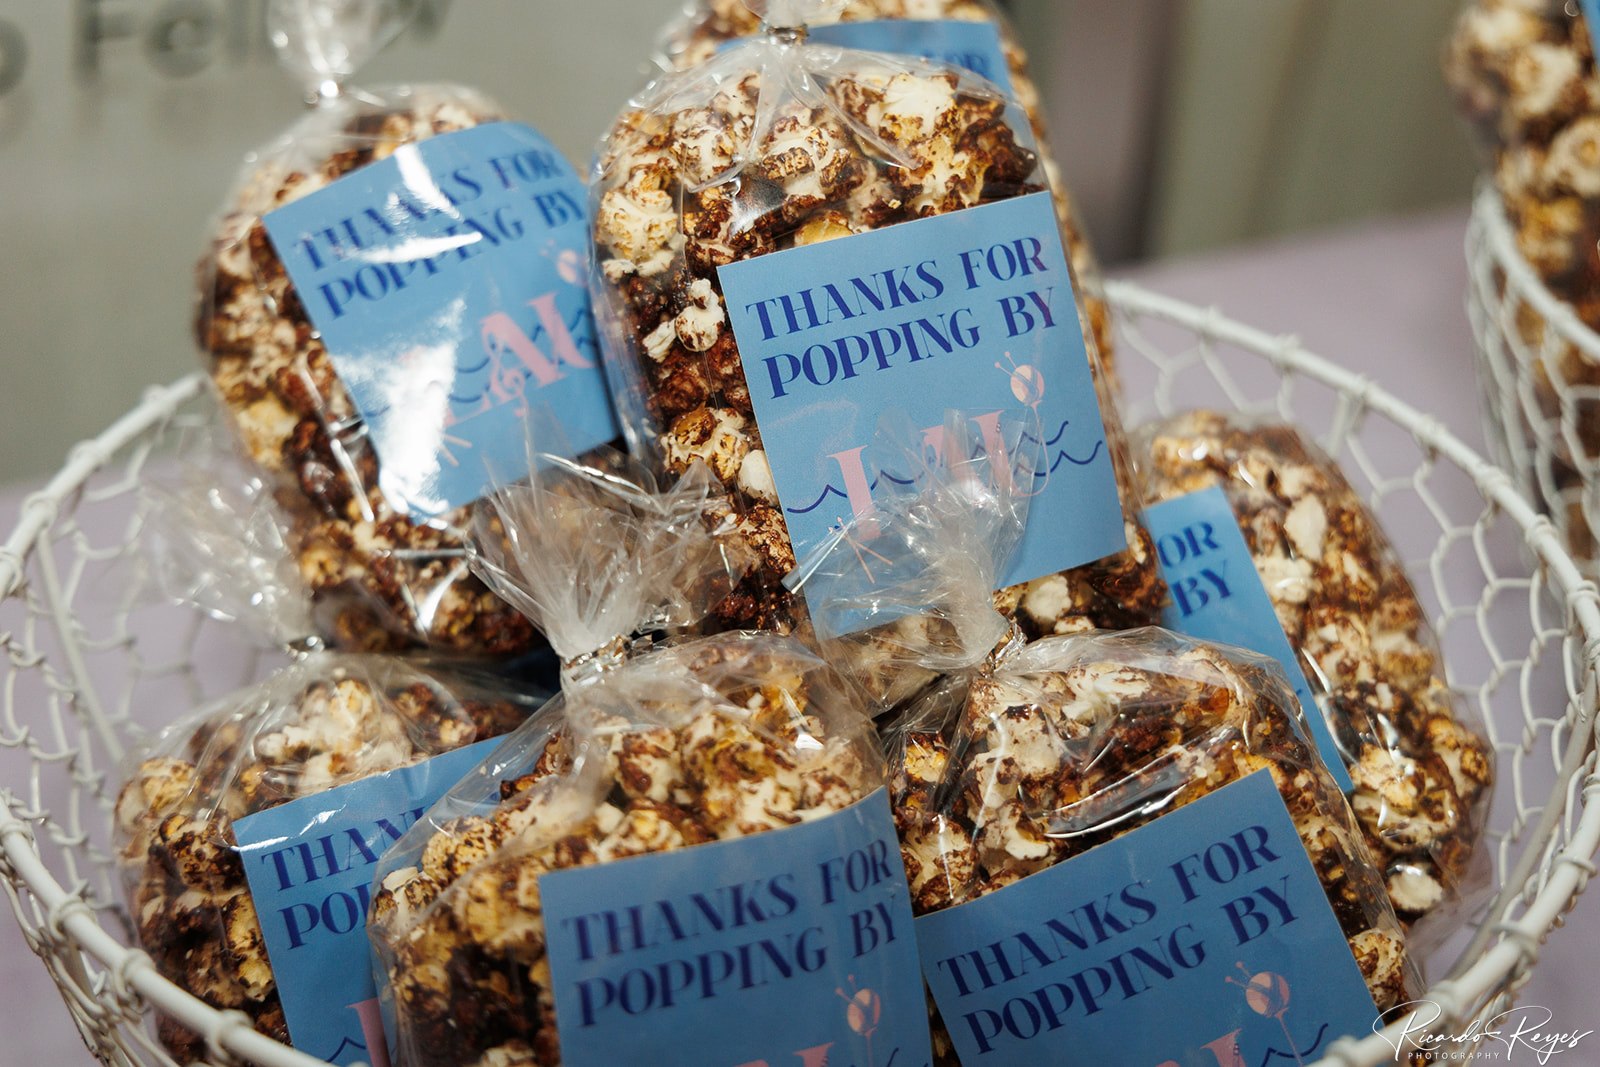 Popcorn favors for Lana to a Tea All About Lana Bat Mitzvah Party at VisArts in Rockville, MD | Pop Color Events | Adding a Pop of Color to Bar & Bat Mitzvahs in DC, MD & VA | Photo by: Ricardo Reyes Photography